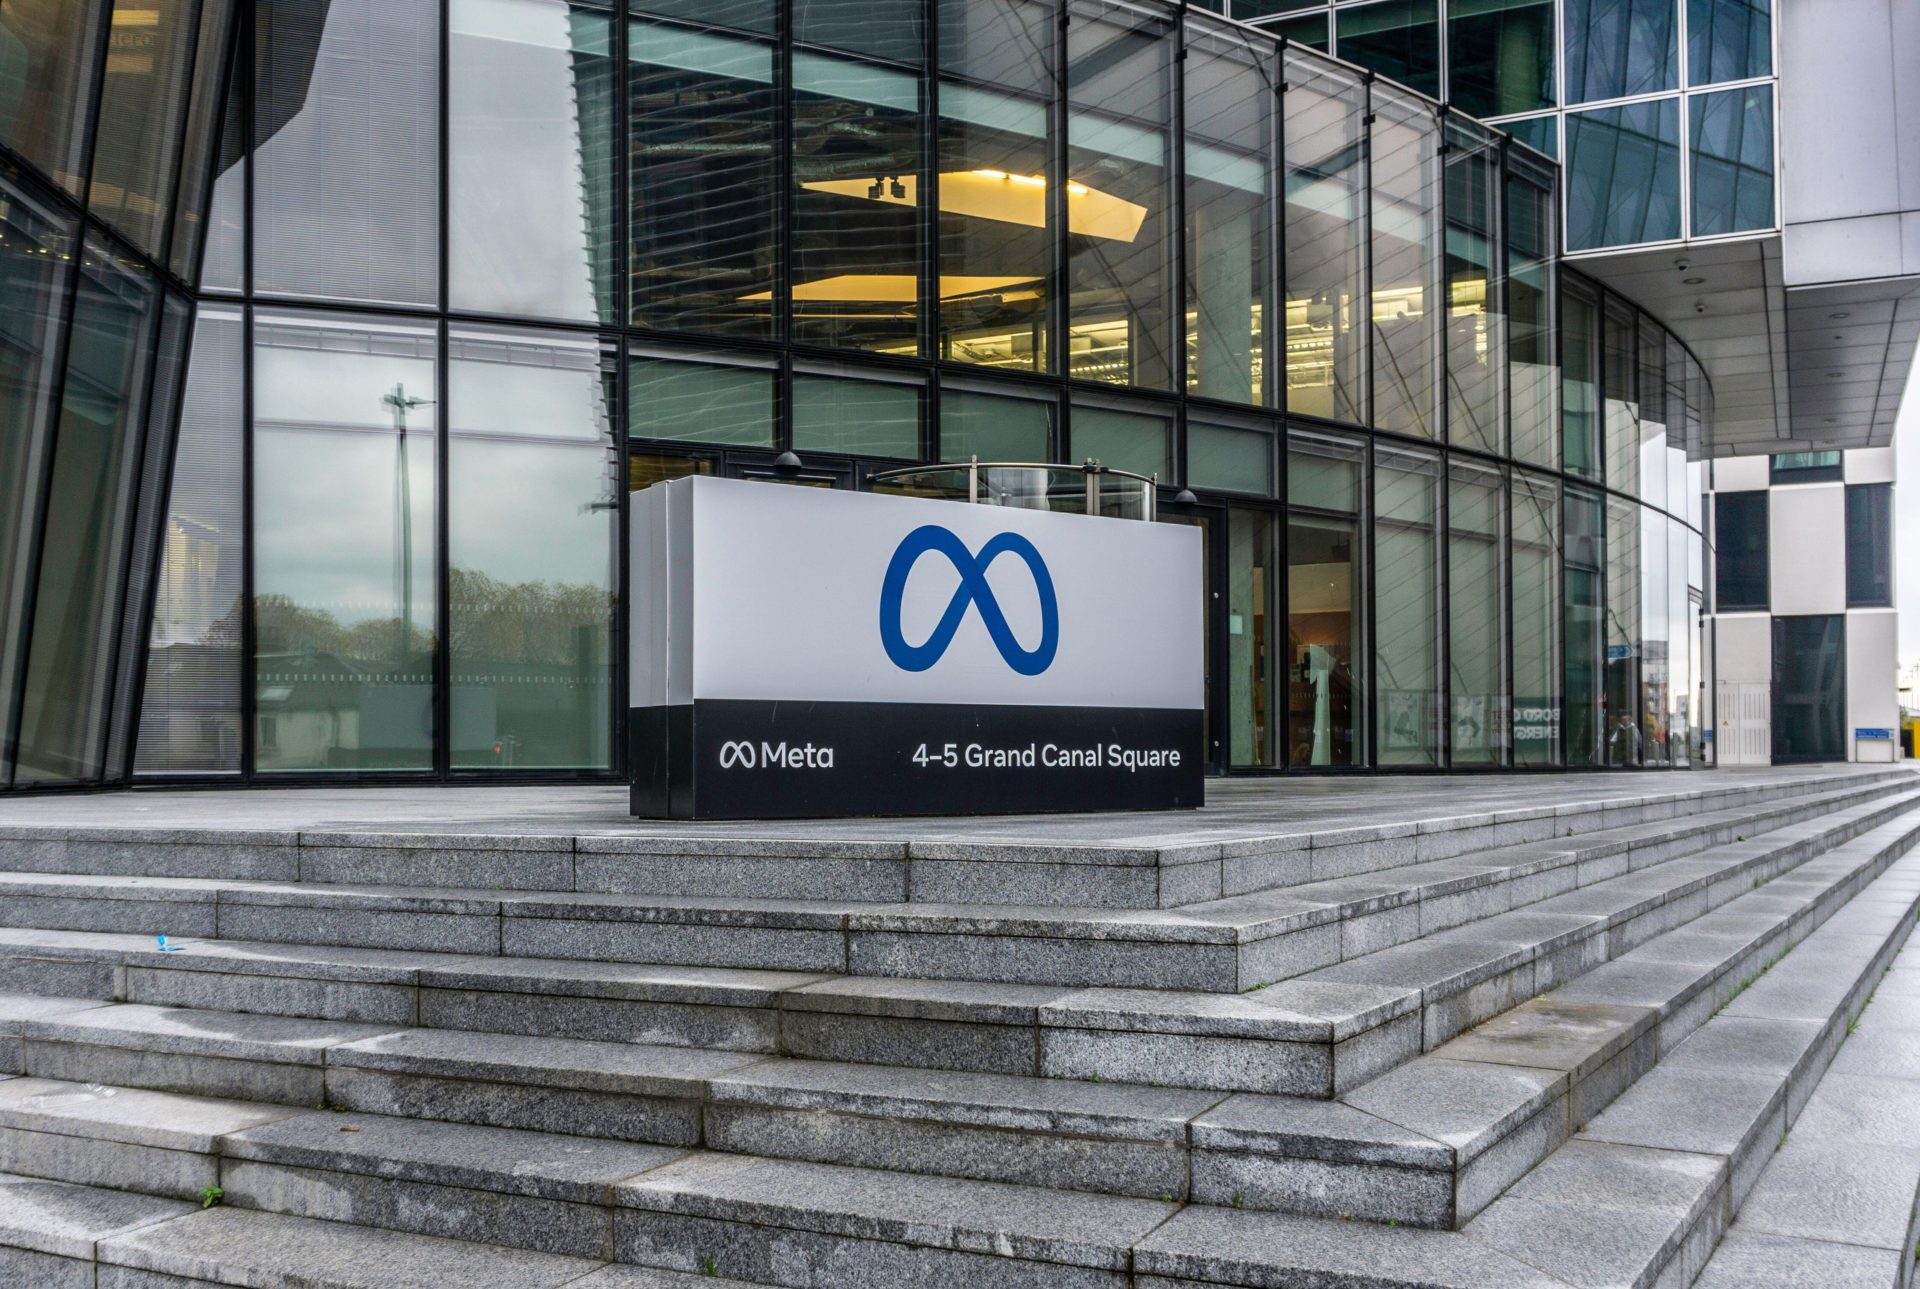 The European headquarters of Meta at Grand Canal Square in Dublin.